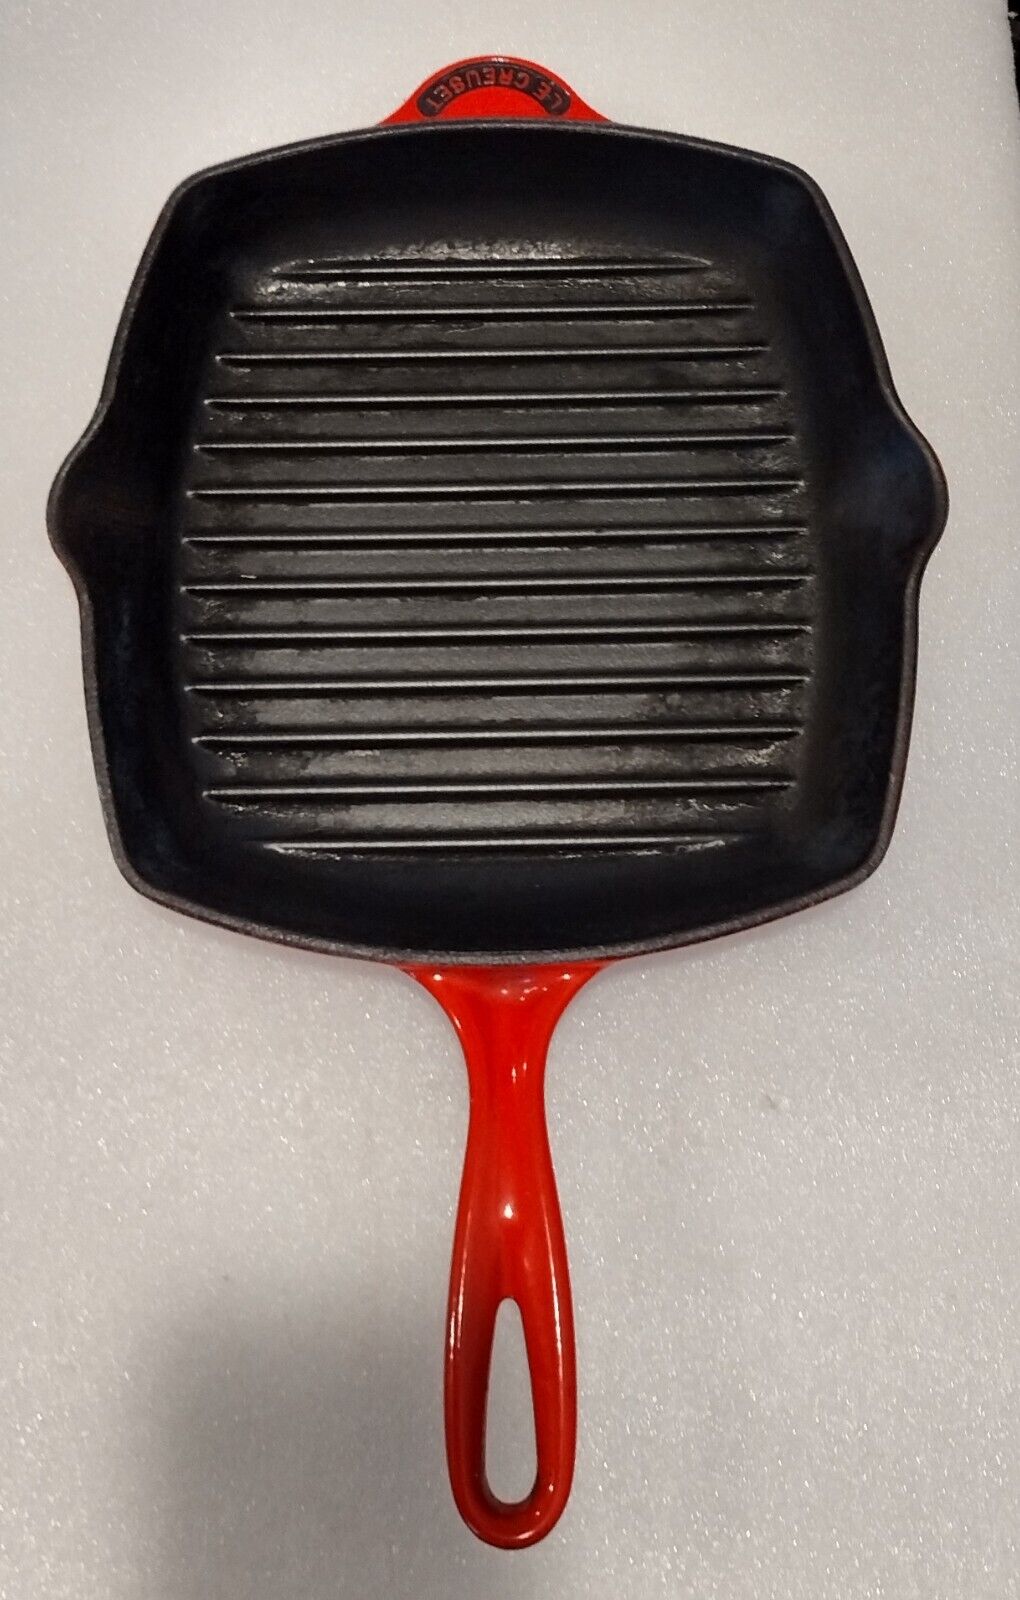 LE CREUSET CAST IRON ENAMEL SQUARE GRILL PAN SKILLET RED MADE IN FRANCE #26